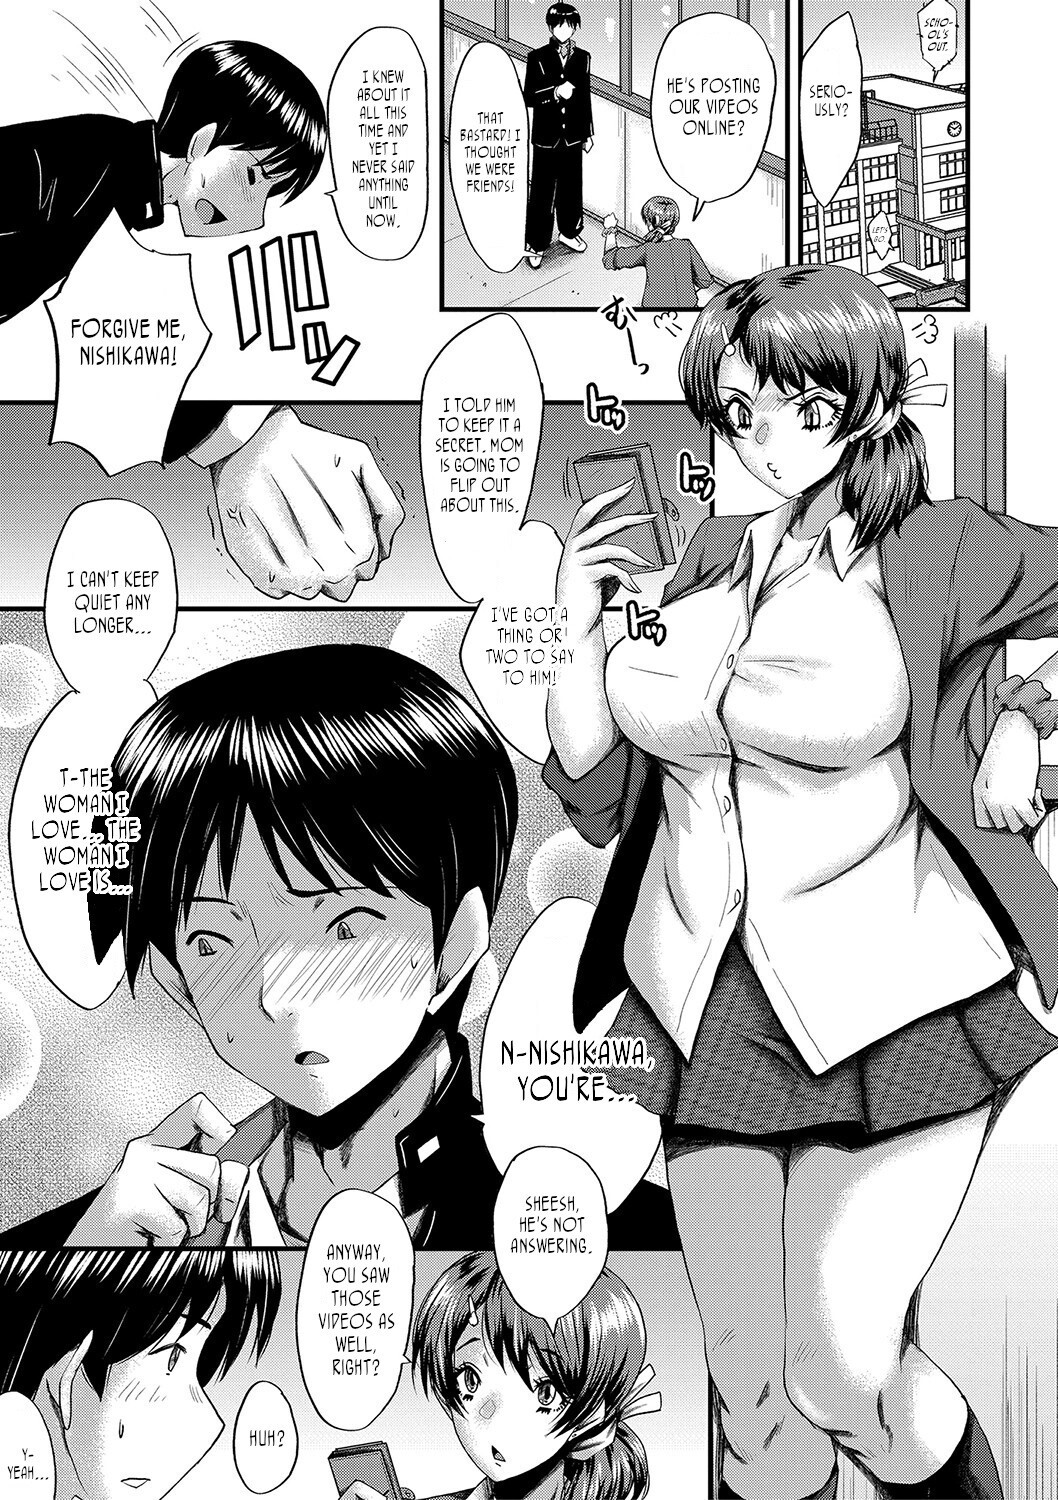 Hentai Manga Comic-My friend stole away both my childhood friend and my mother,-Chapter 5-1